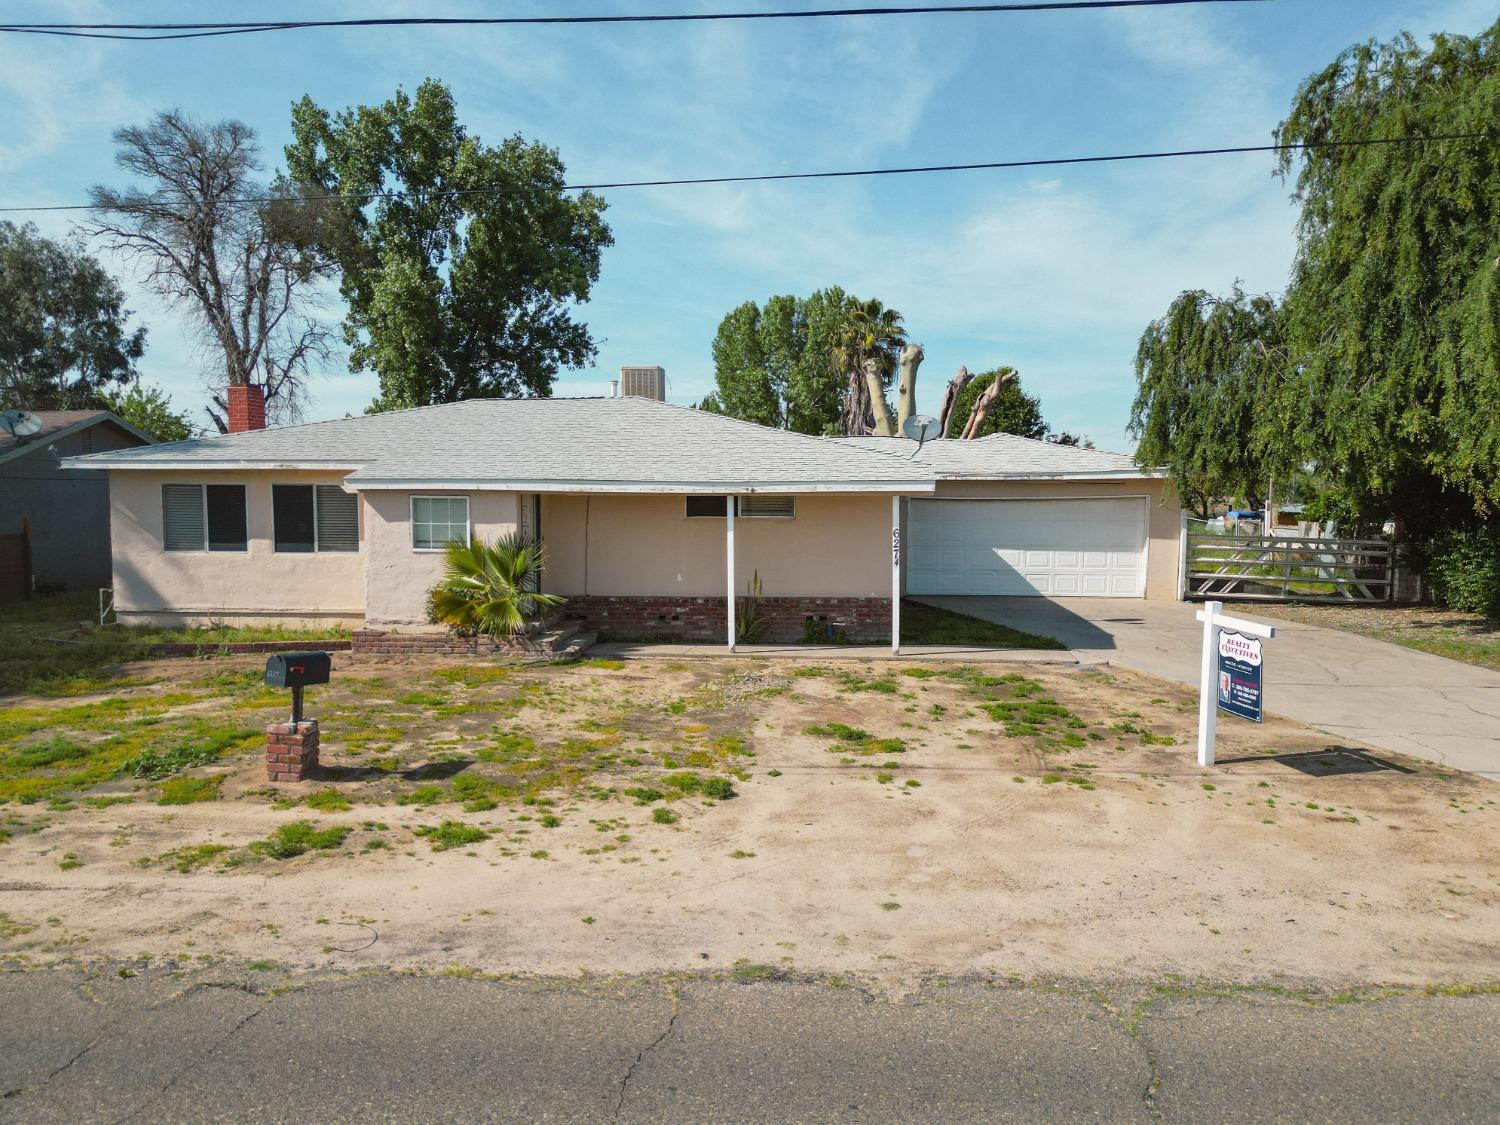 Photo of 6274 Gertrude Ave in Winton, CA